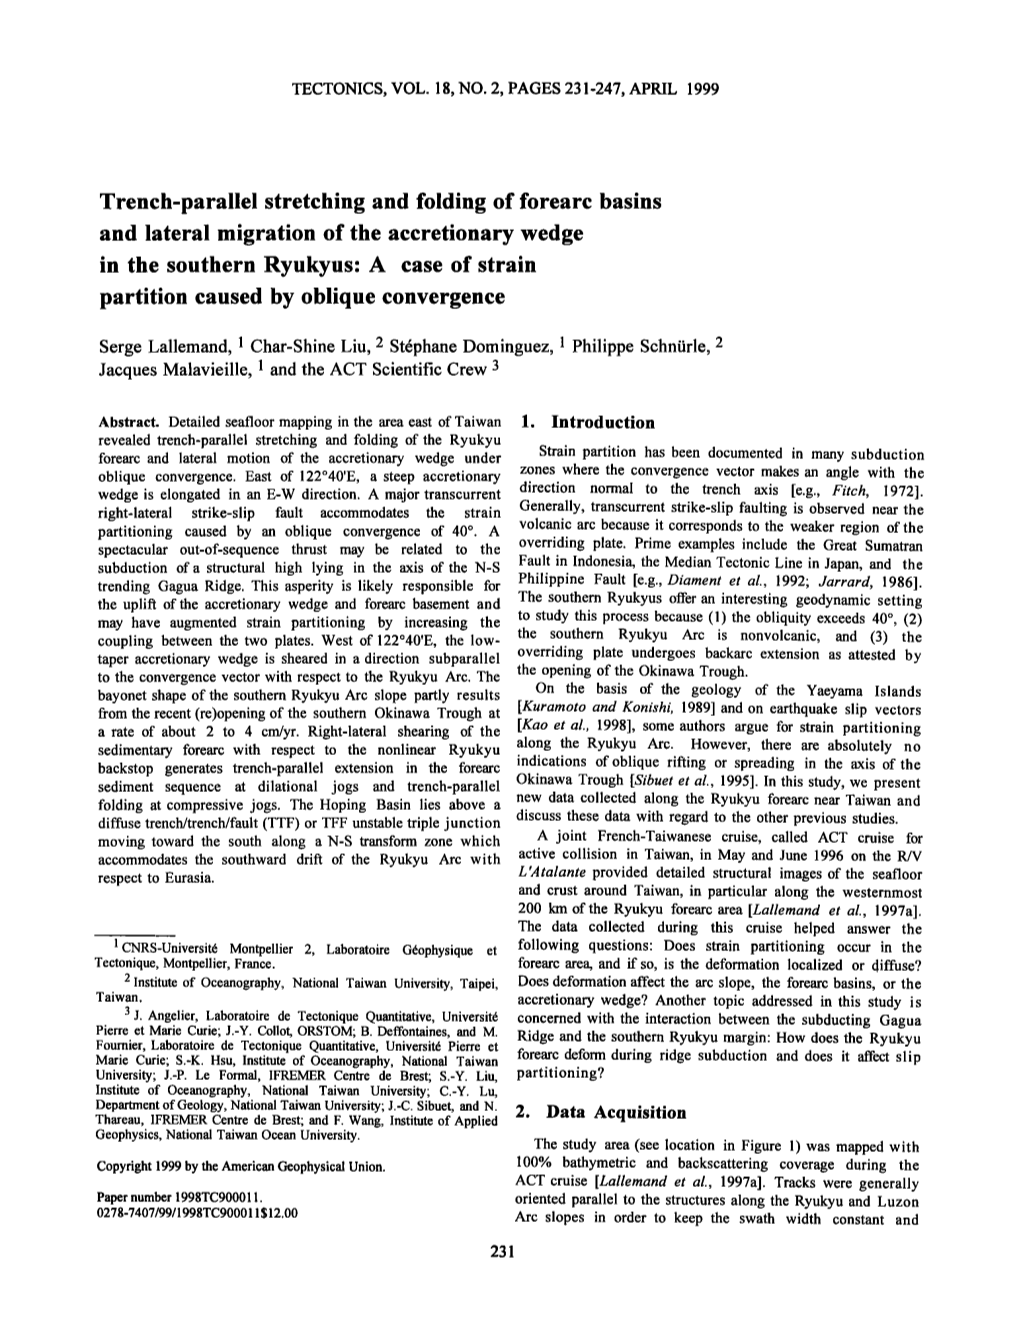 Parallel Stretching and Folding of Forearc Basins and Lateral Migration